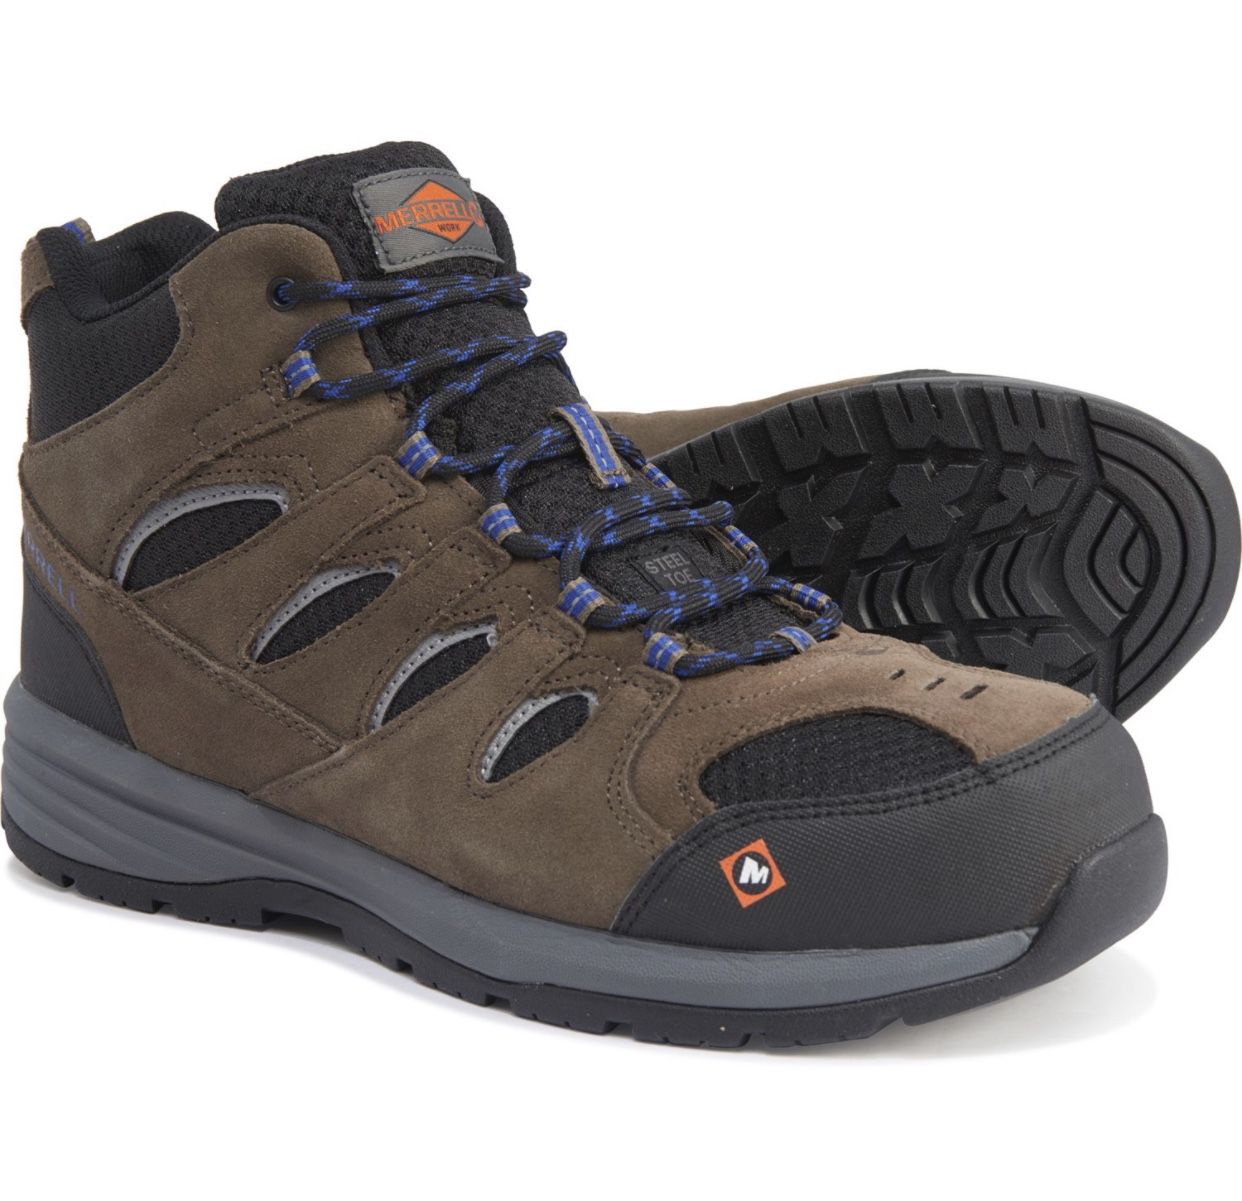 Merrell Windoc Mid Work Boots Steel Safety Toe Boulder